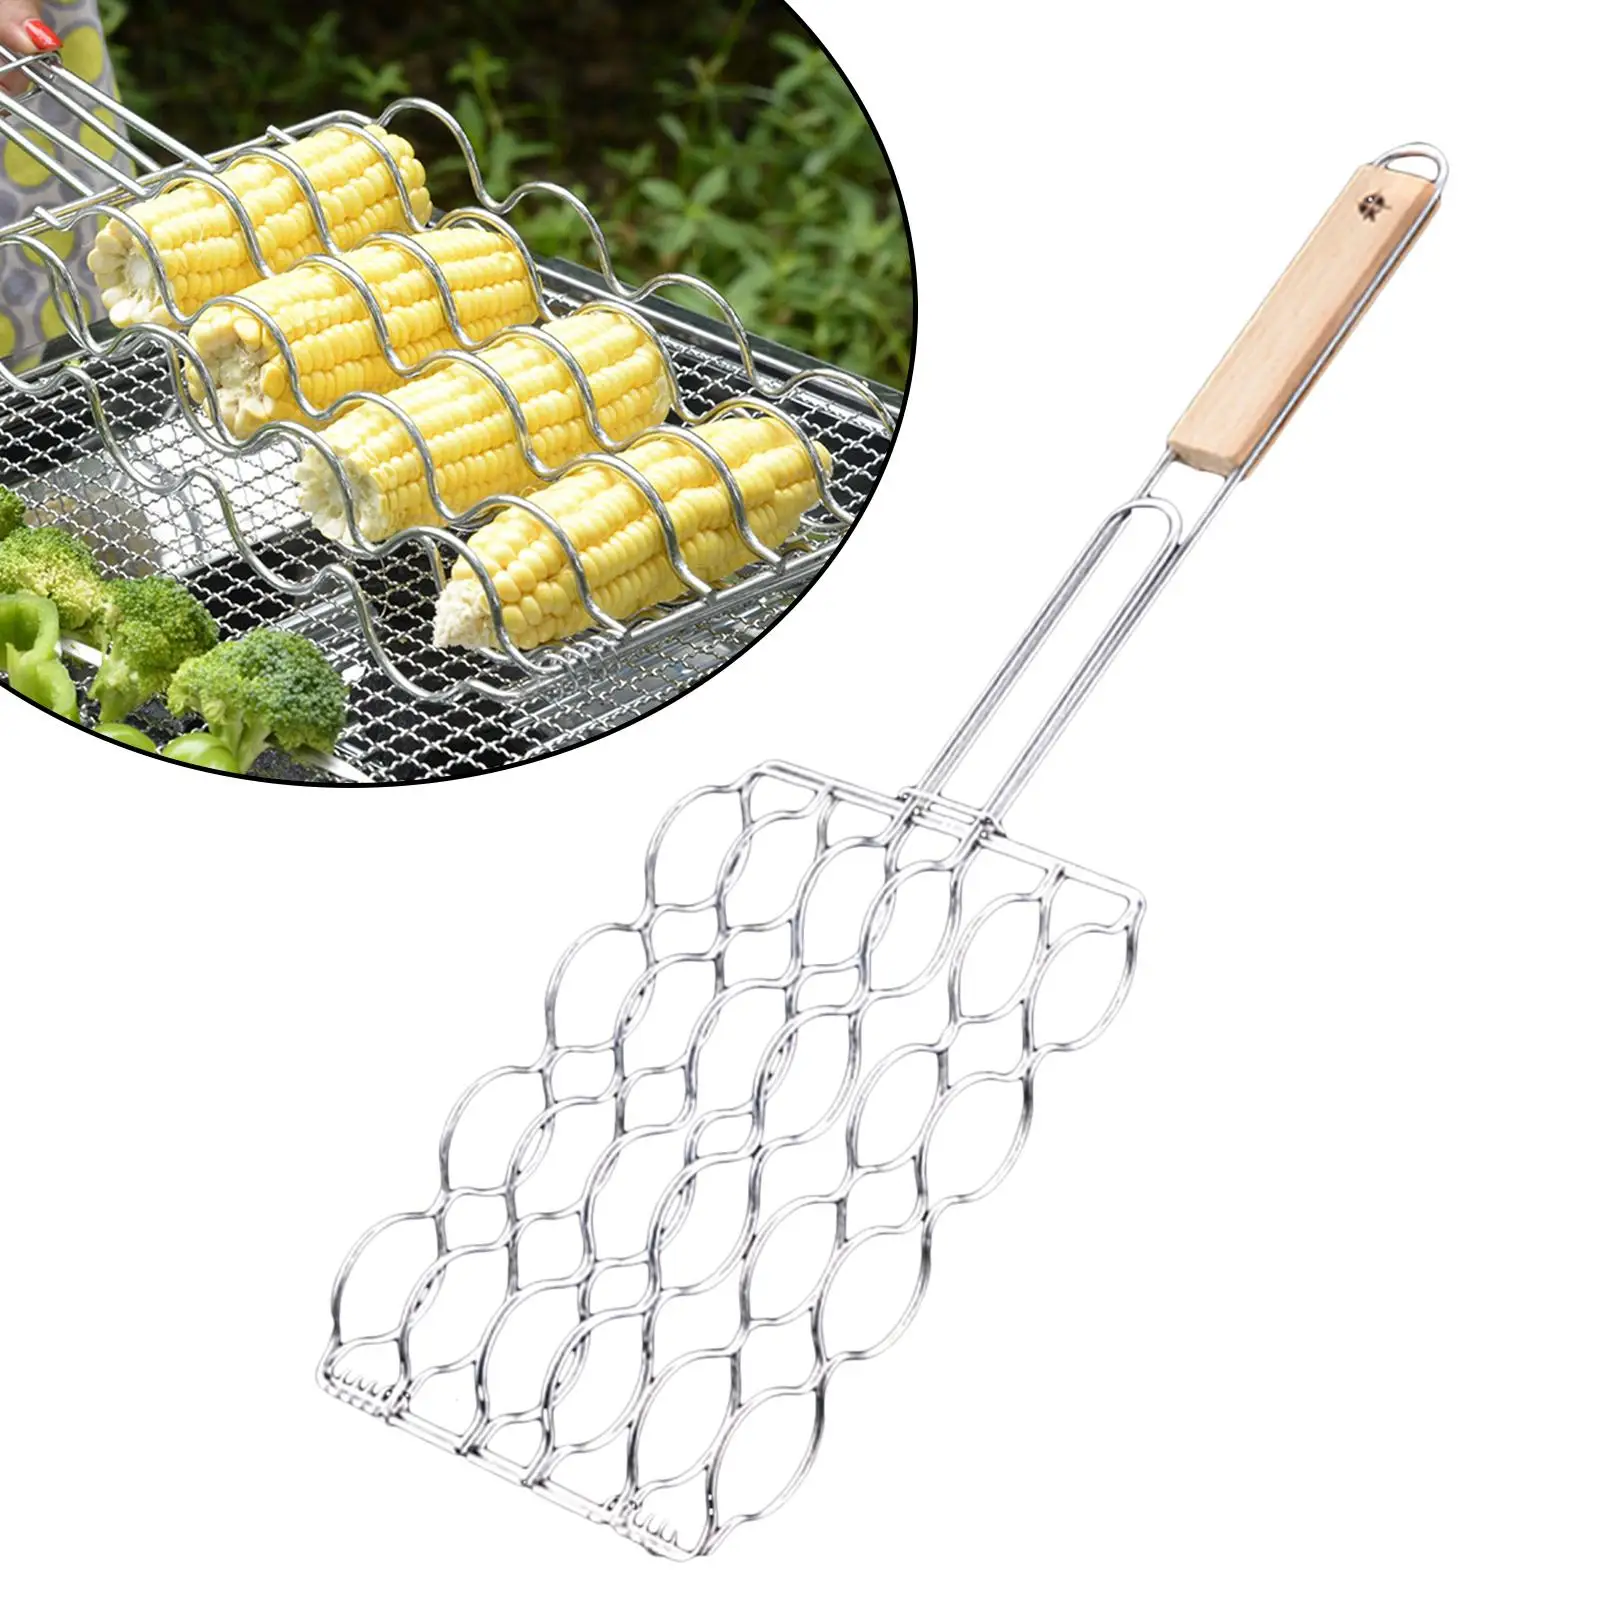 Hot Dog Rack Barbecue Grill Basket Tools ,57x18x5cm for Grill, Ovens Cooking Accessories Comfortable Grip Premium Materials